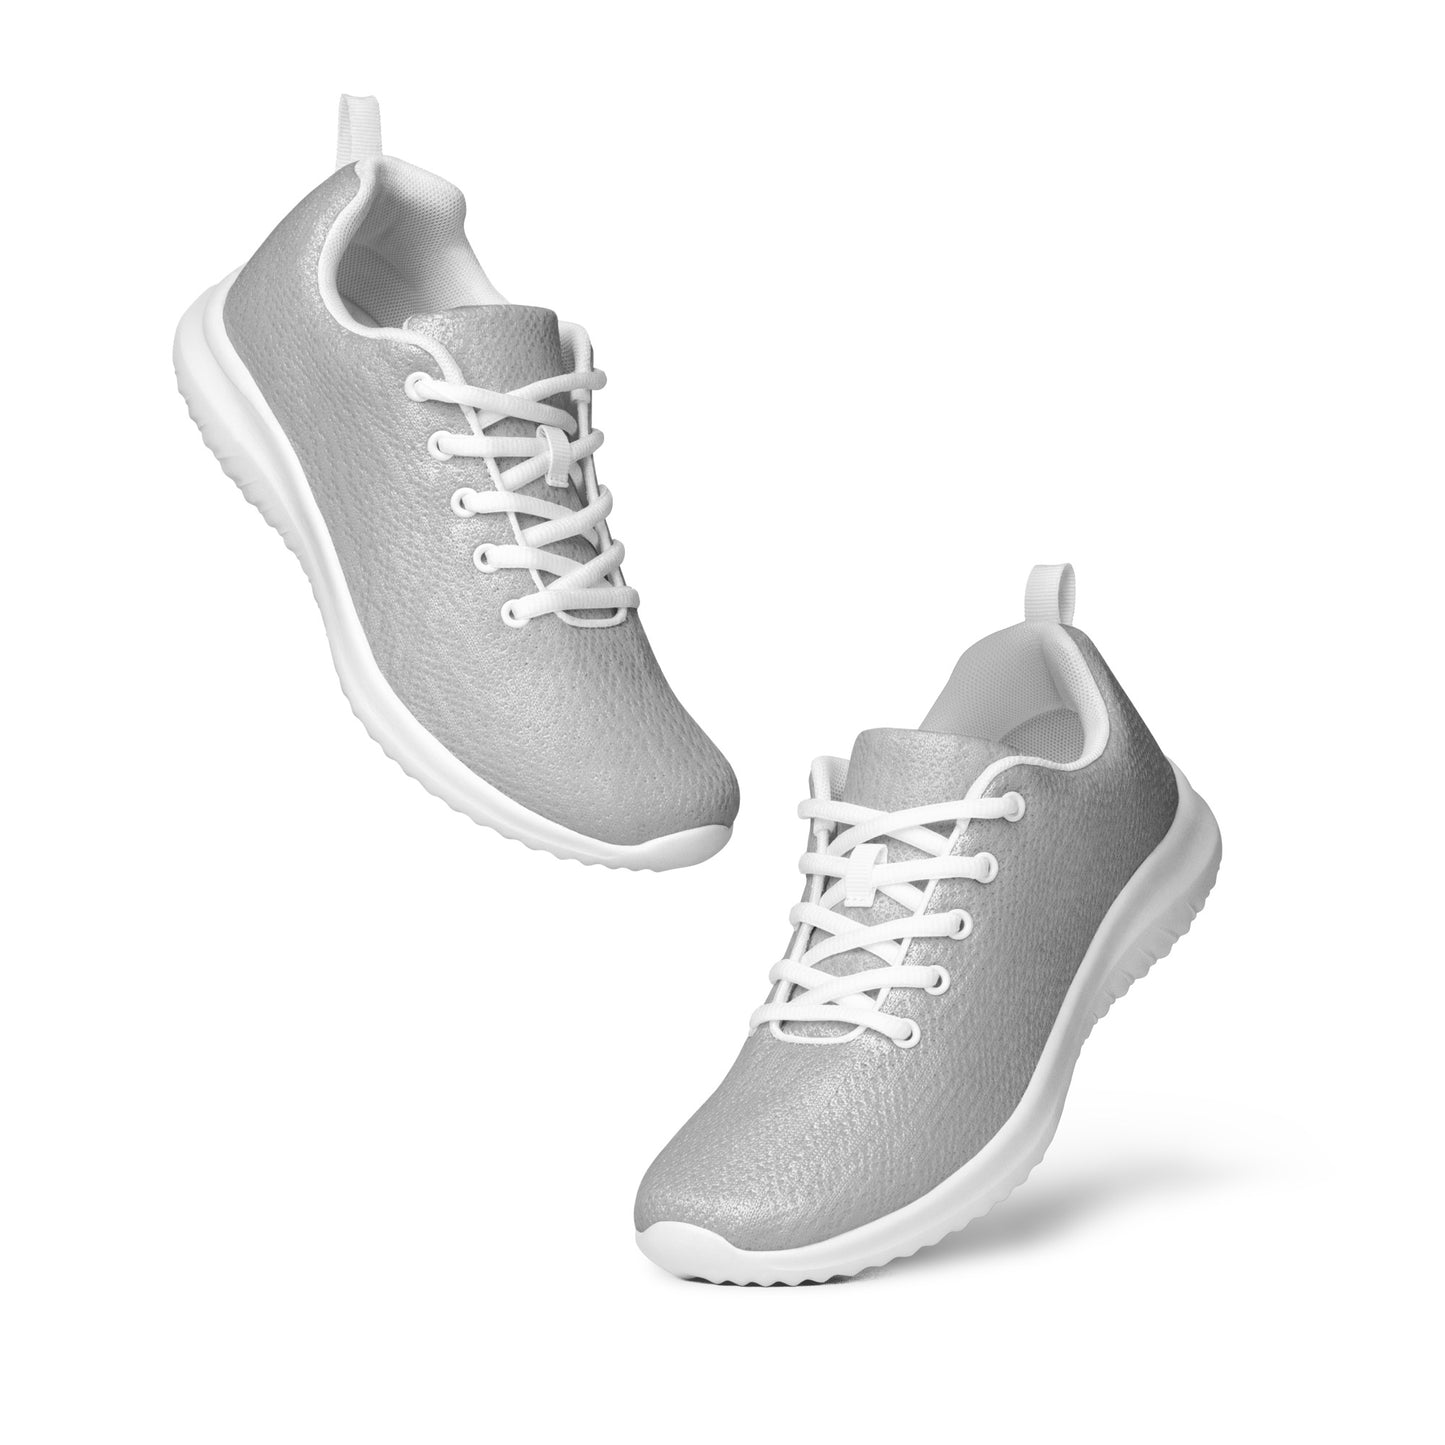 Women’s Silver Athletic Shoes